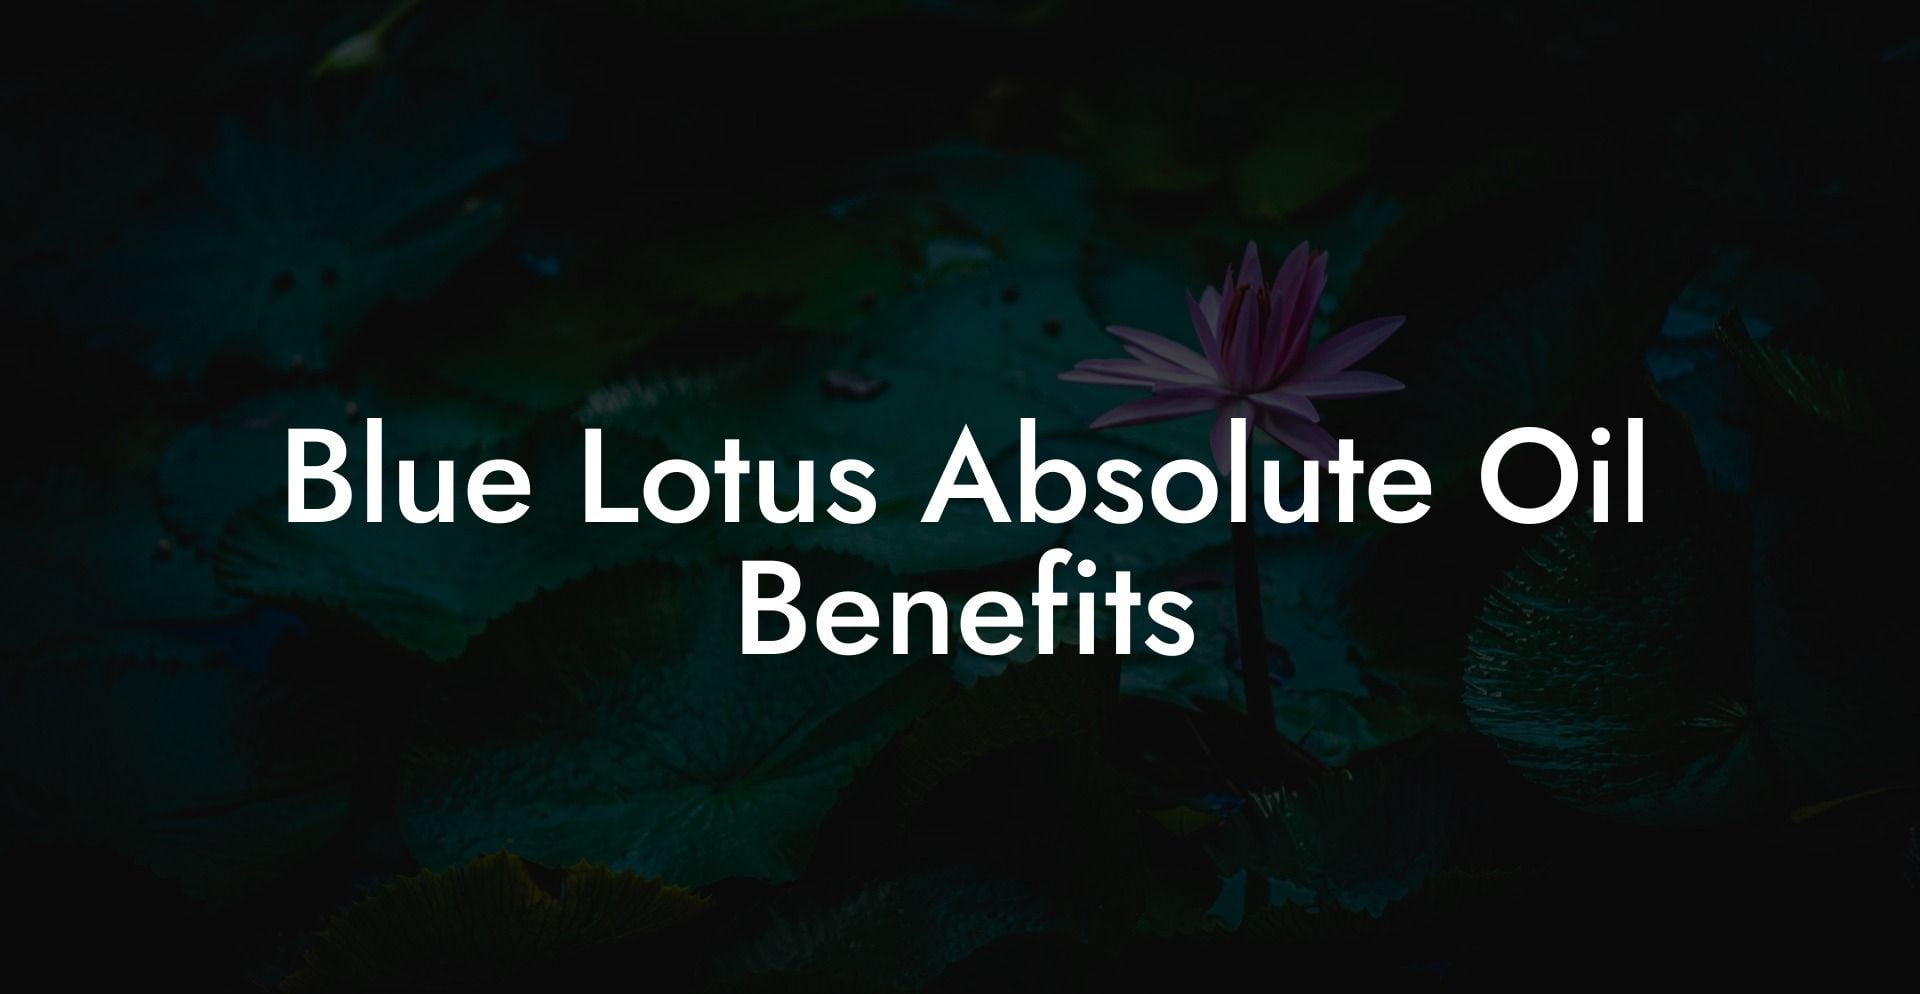 Blue Lotus Absolute Oil Benefits